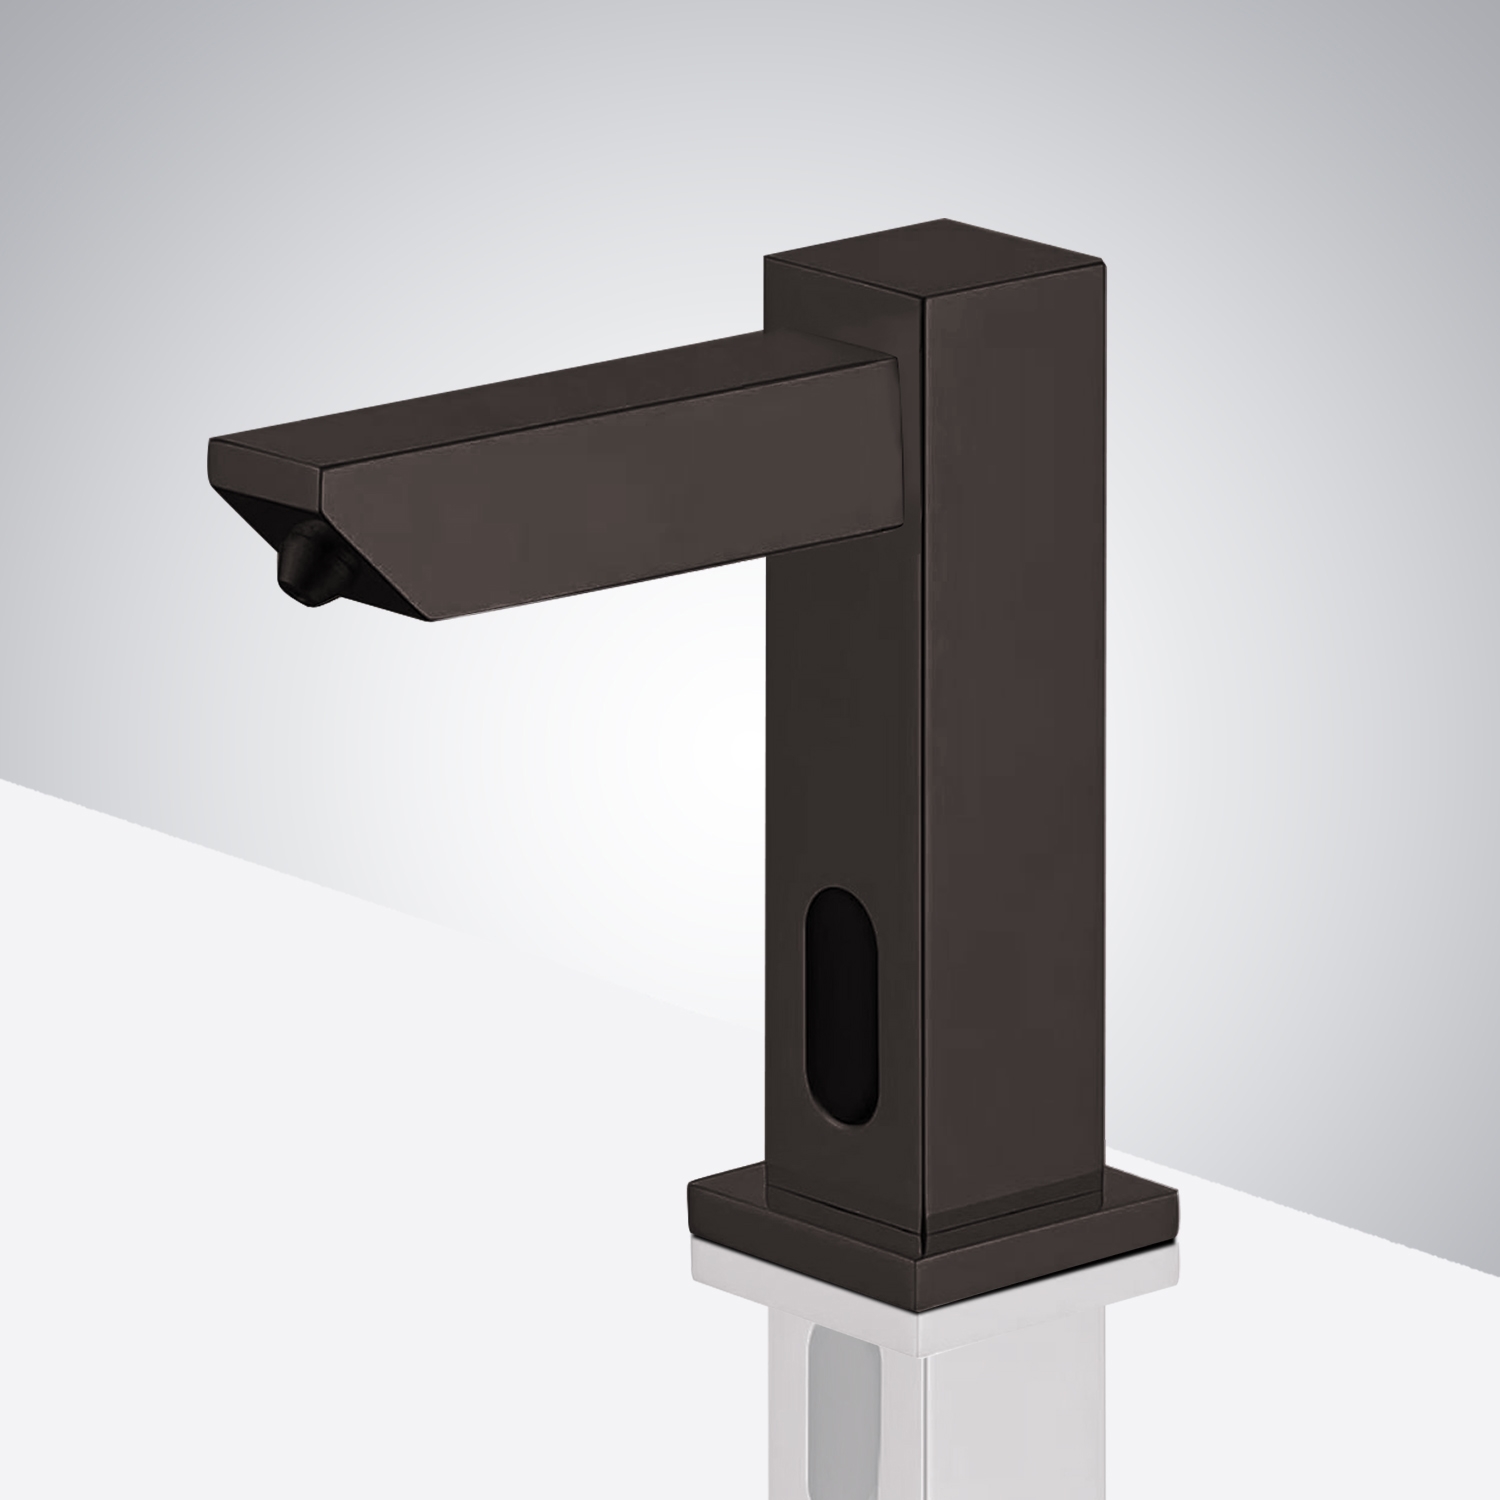 Fontana Commercial Deck Mount Automatic Intelligent Touchless Soap Dispenser in Oil Rubbed Bronze